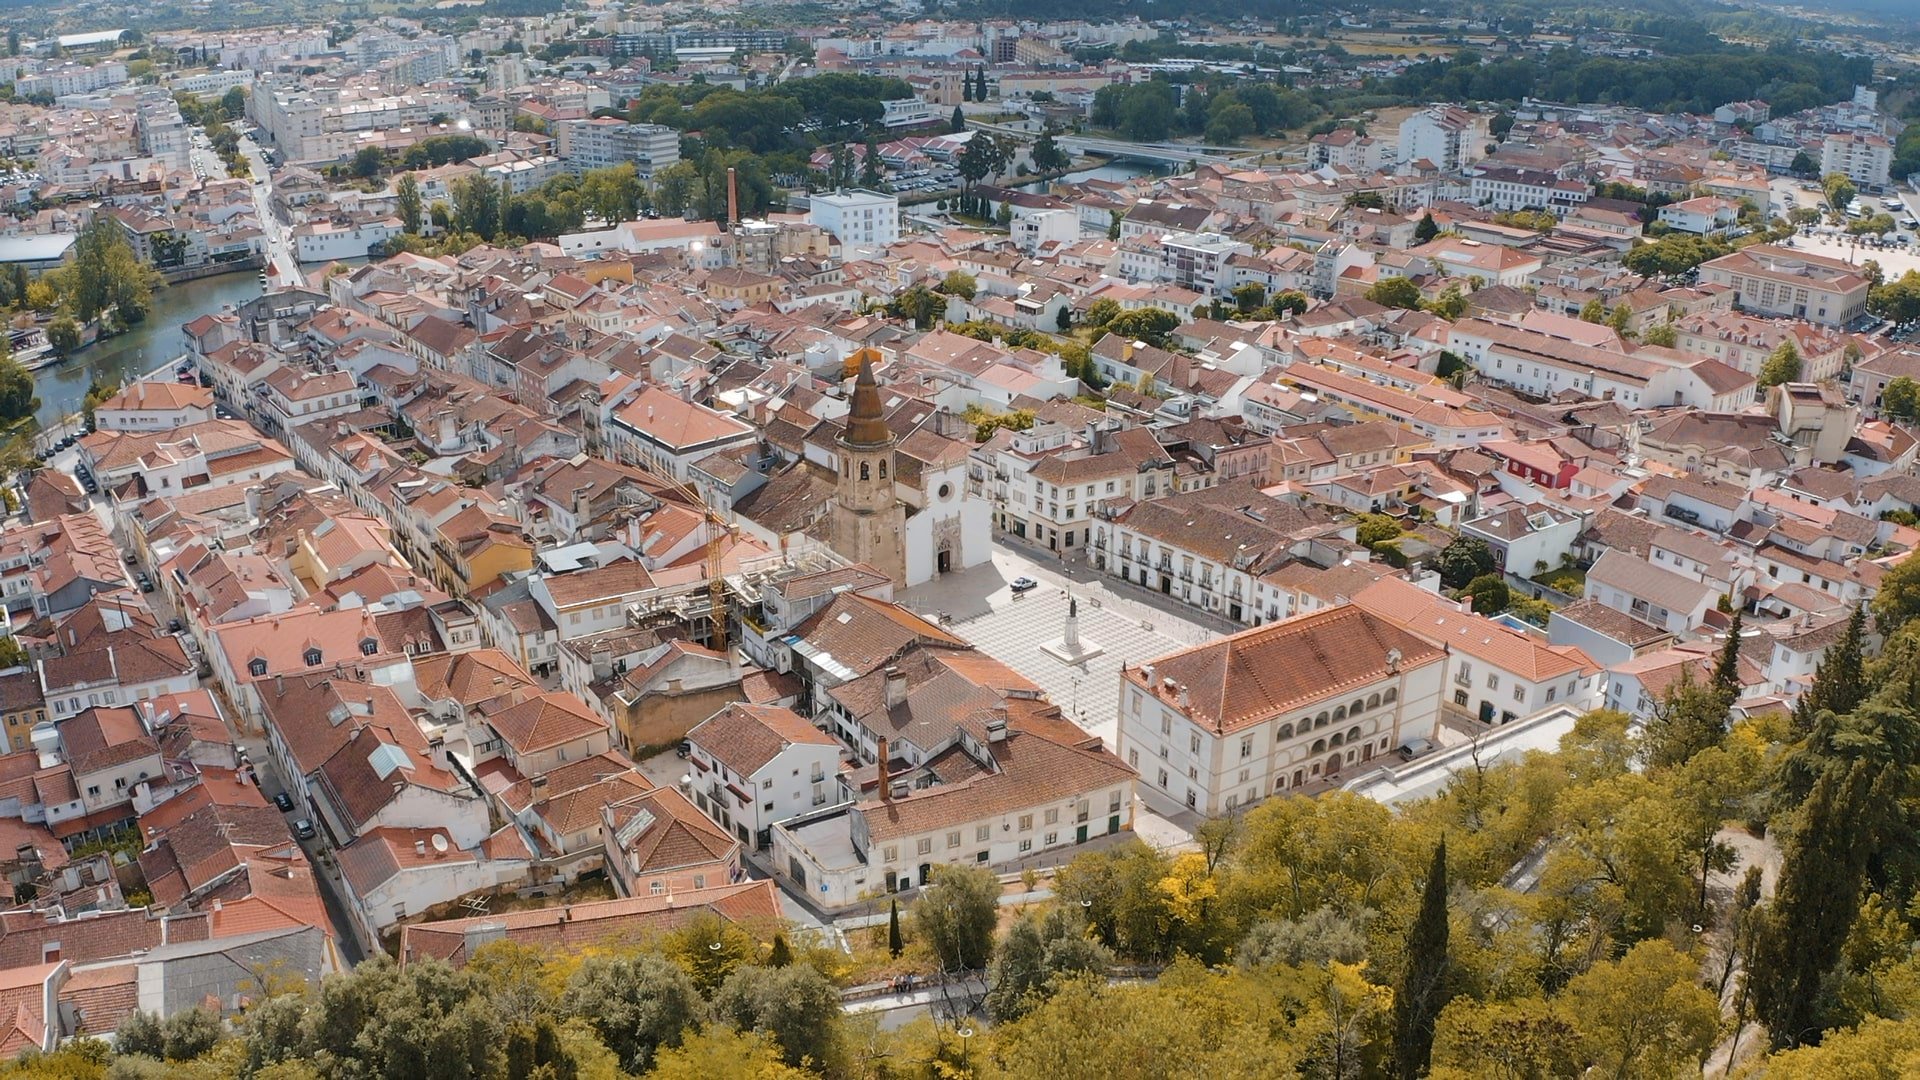 Panoramic view of Tomar through the Castle